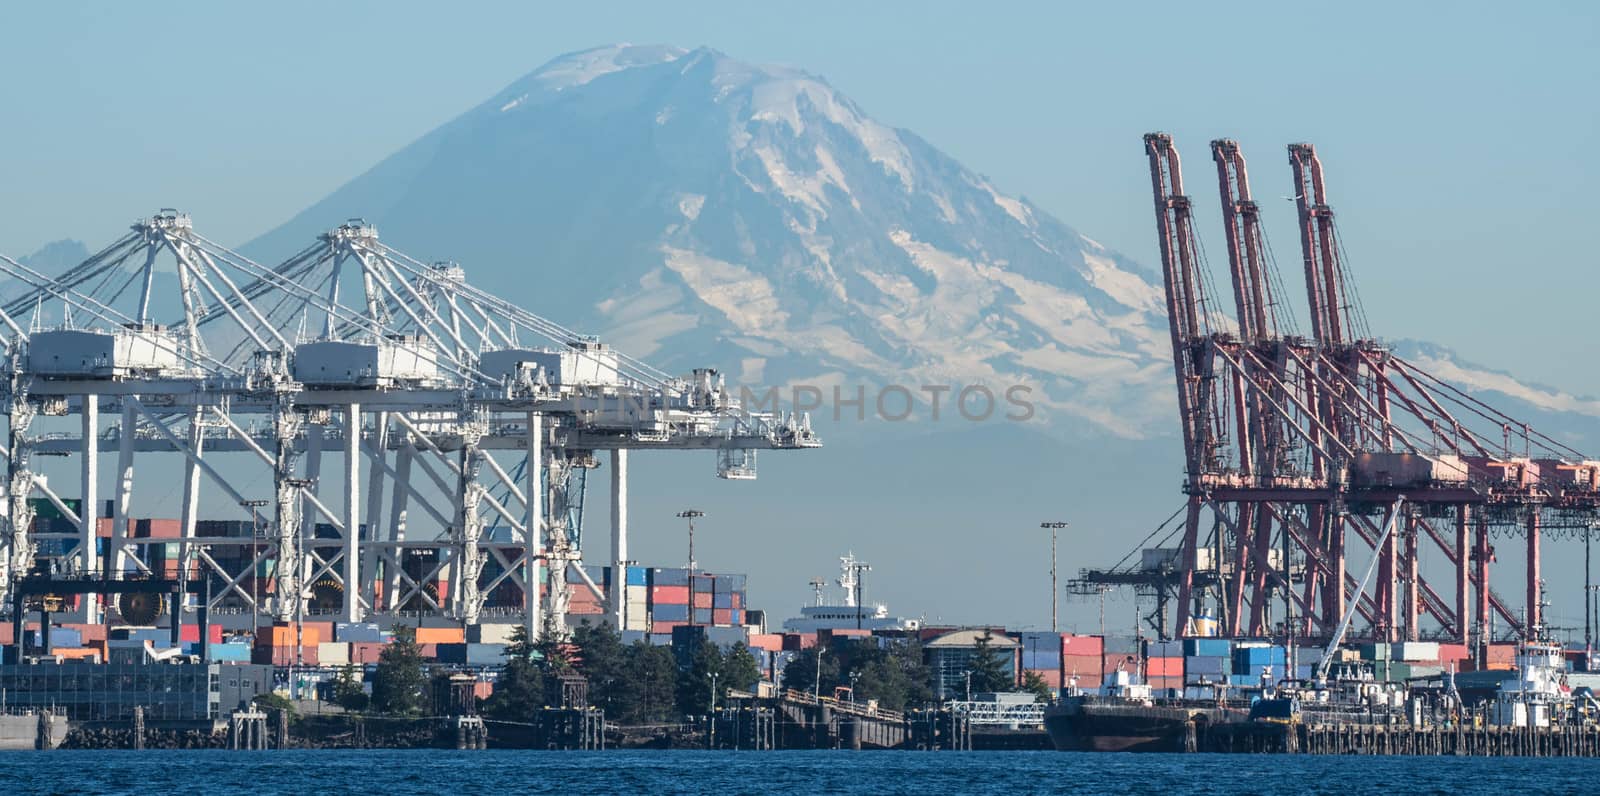 Container Cranes loom over Duwamish Waterway with Mount Rainier in the background.